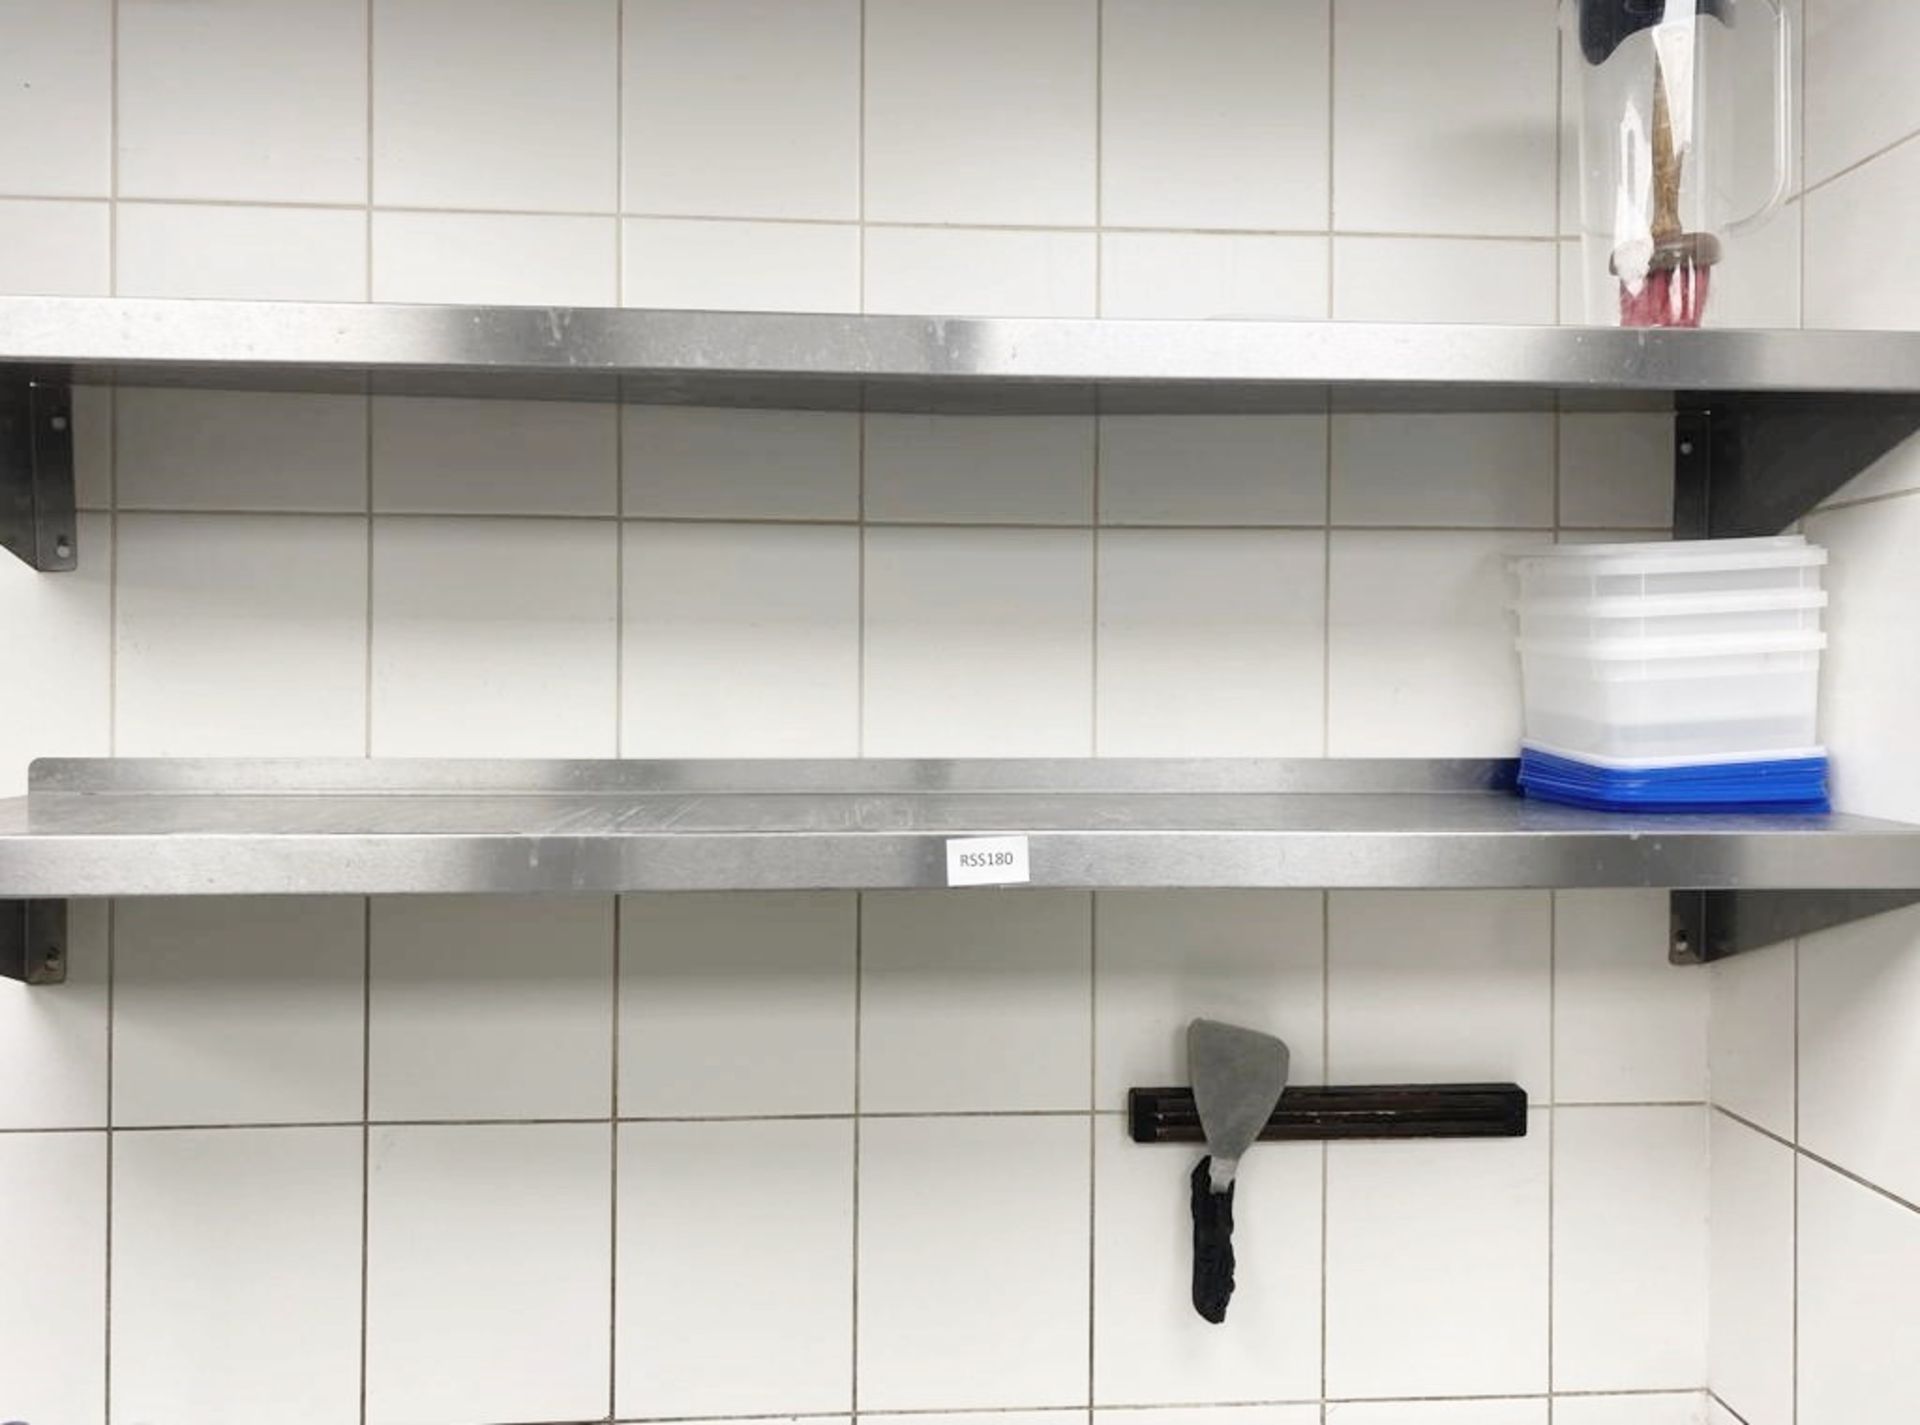 2 x Stainless Steel Food Preparation Shelves - Approx: 2 x 1400mm - Ref: RSS180 - CL835 - Southend